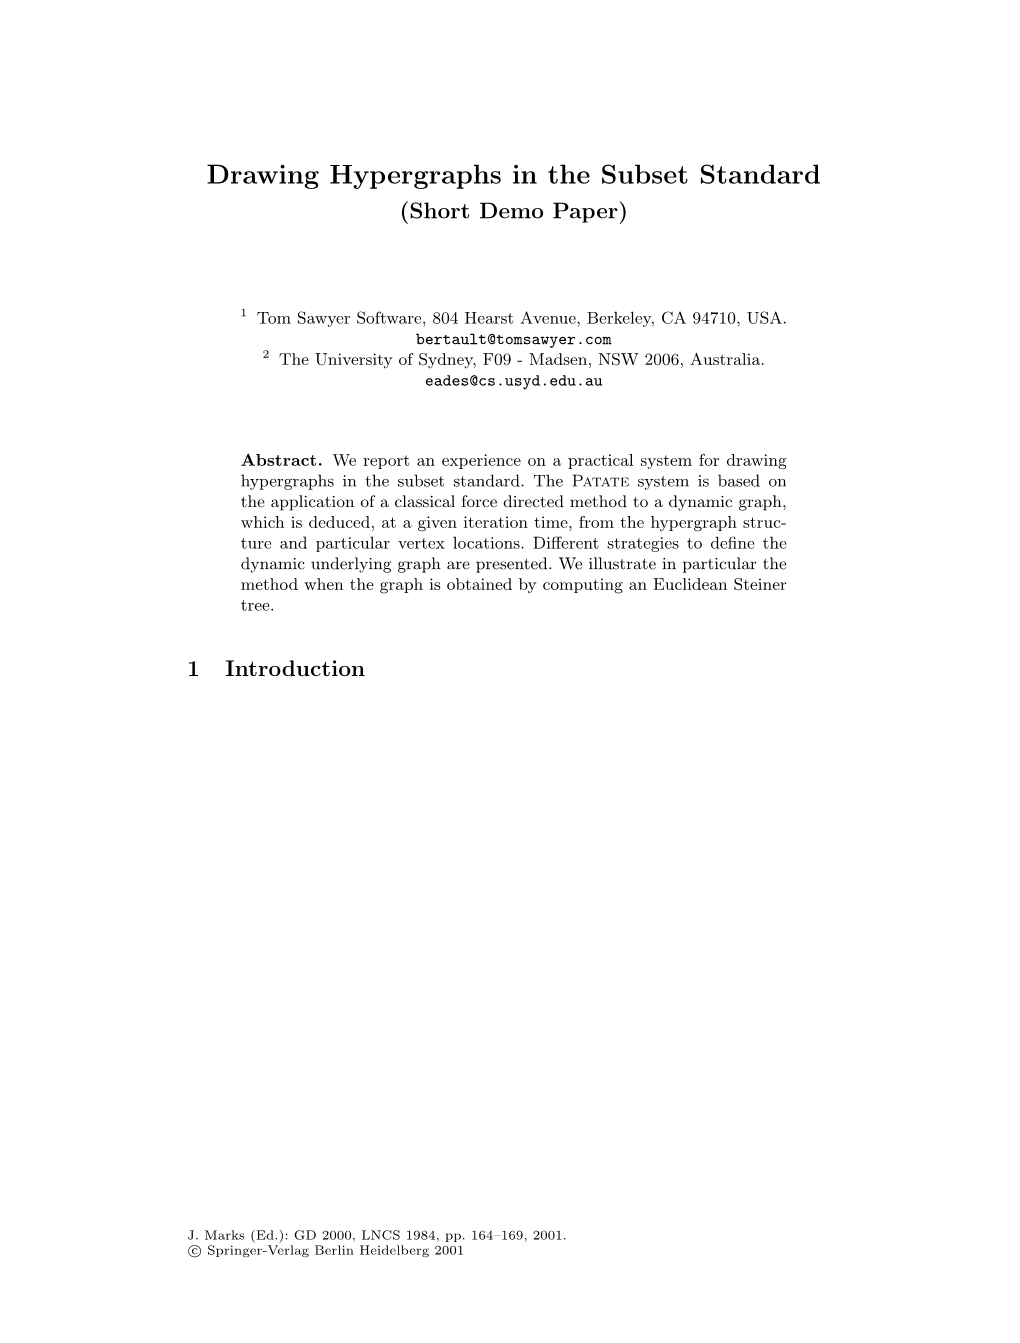 Drawing Hypergraphs in the Subset Standard (Short Demo Paper)